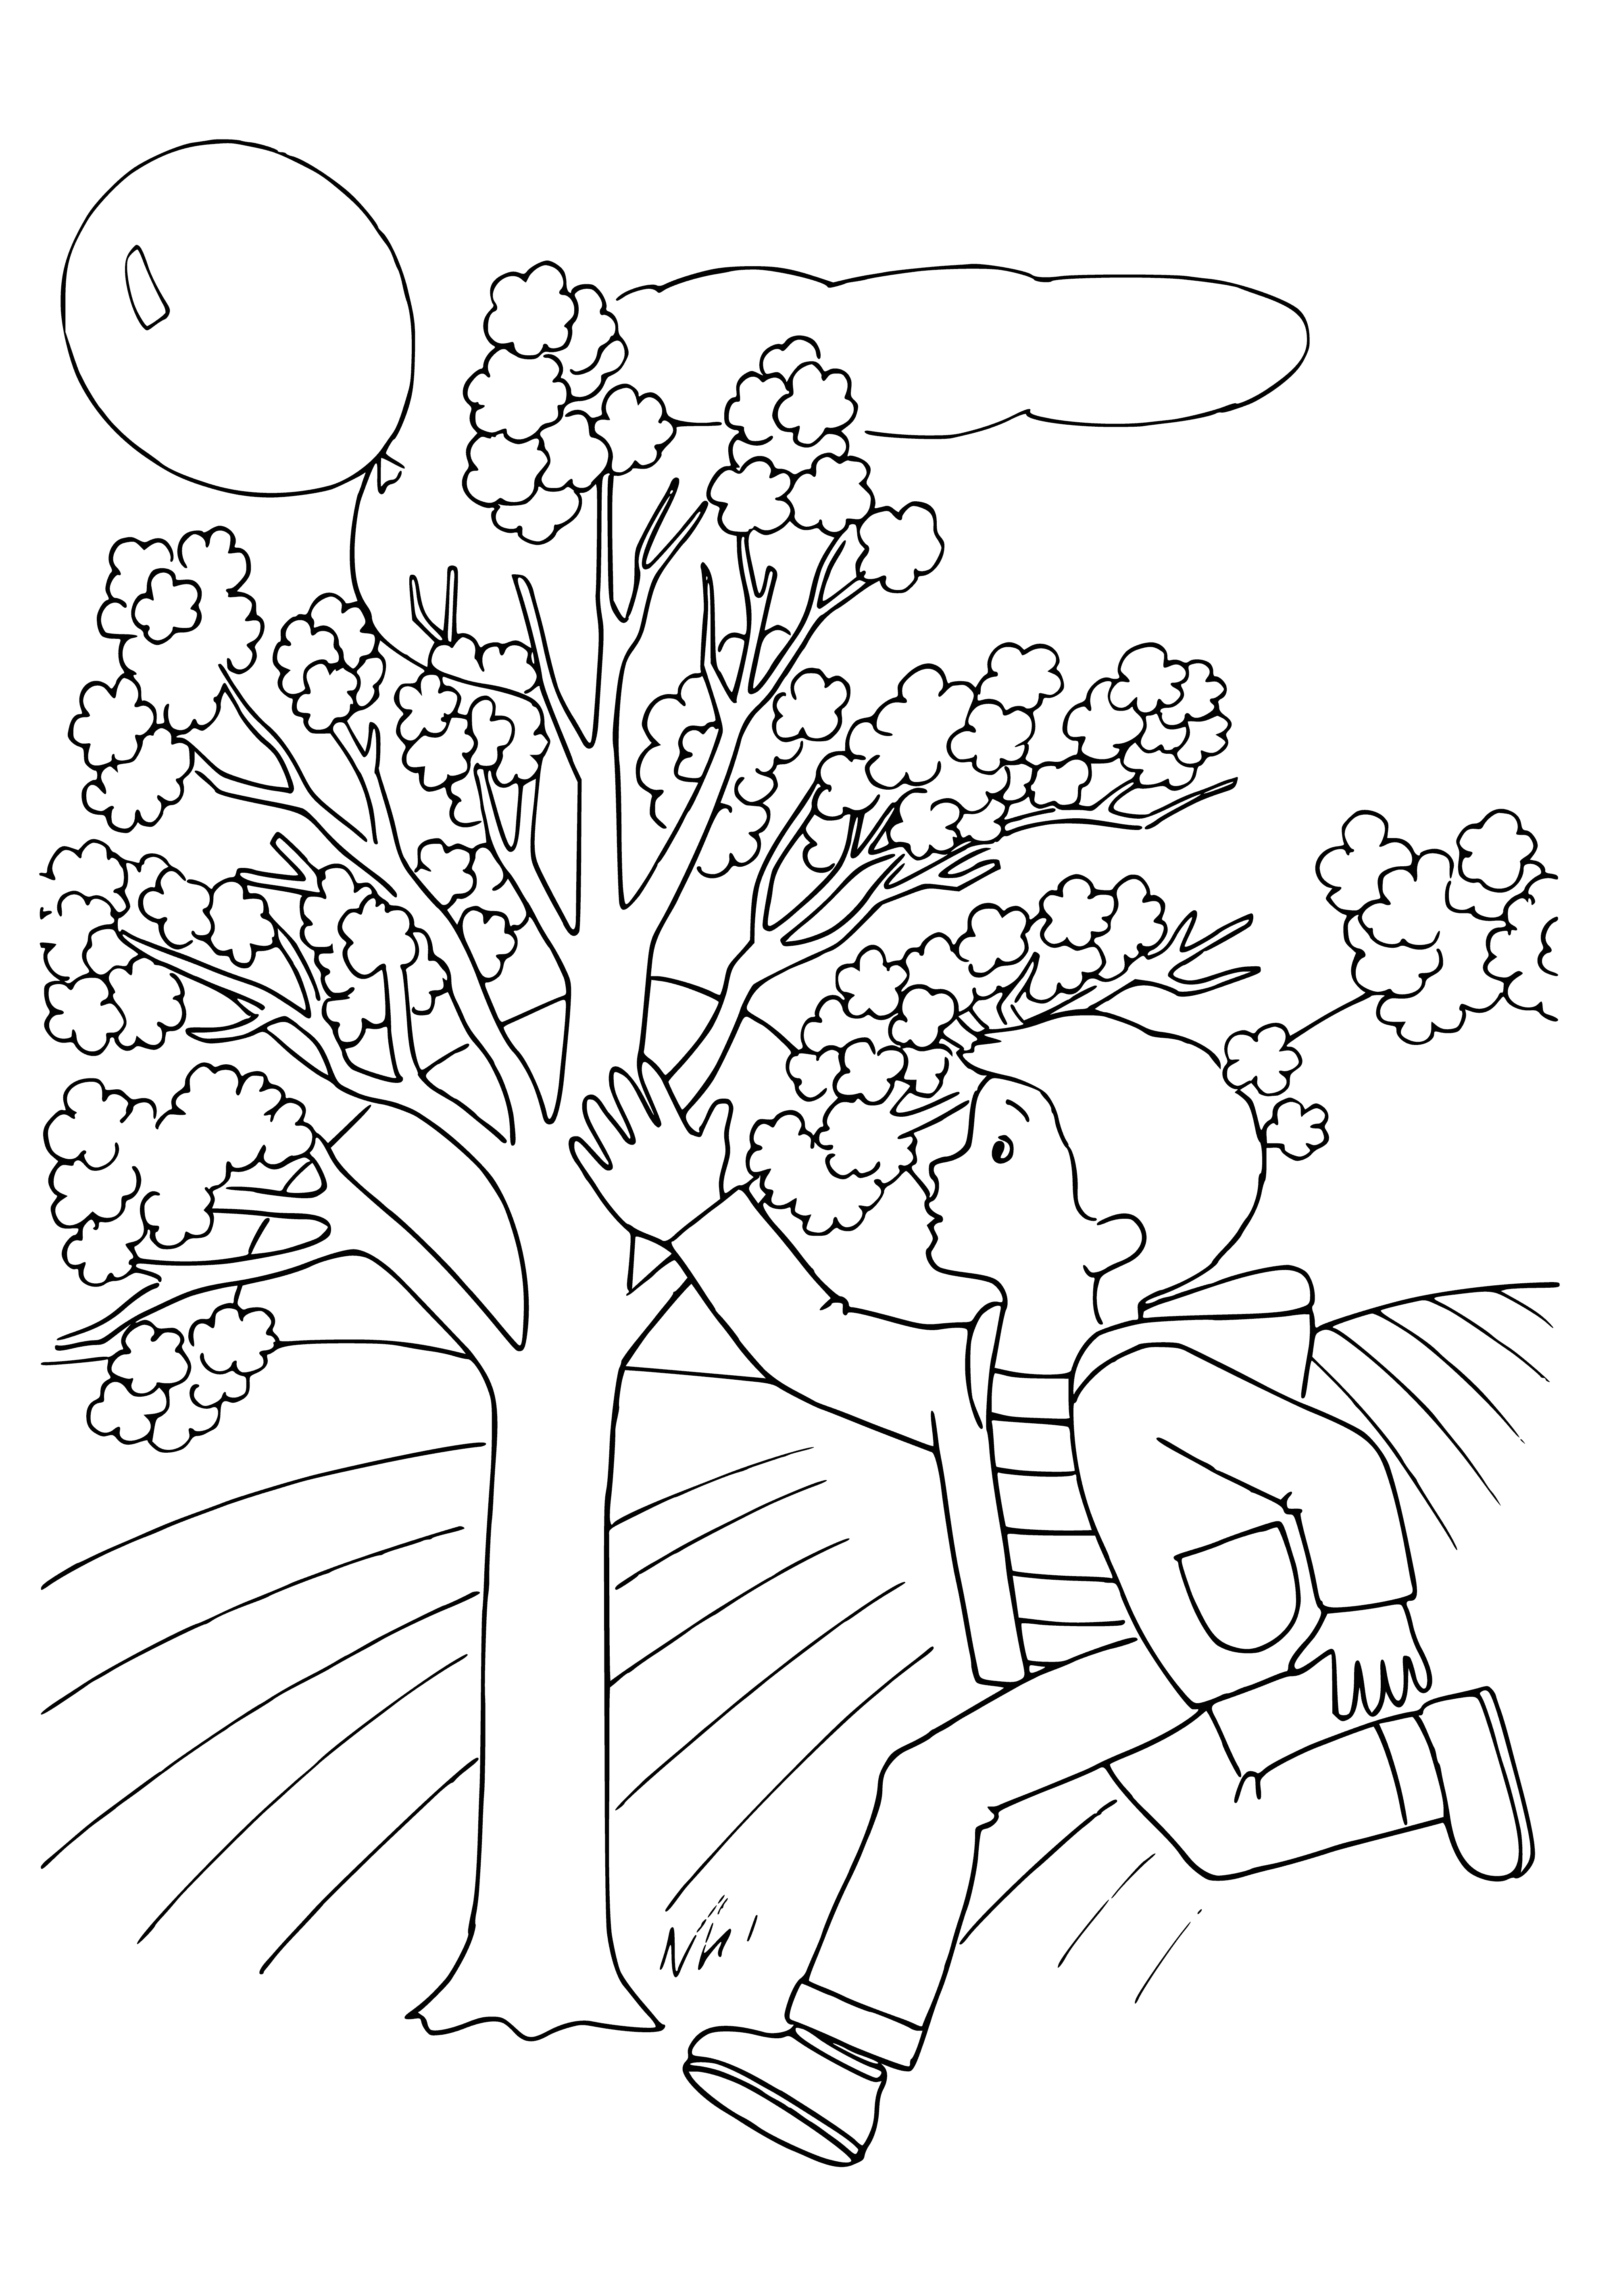 coloring page: Boy playing ball on green lawn with trees & flowers. Wearing blue shirt & holding a red ball.